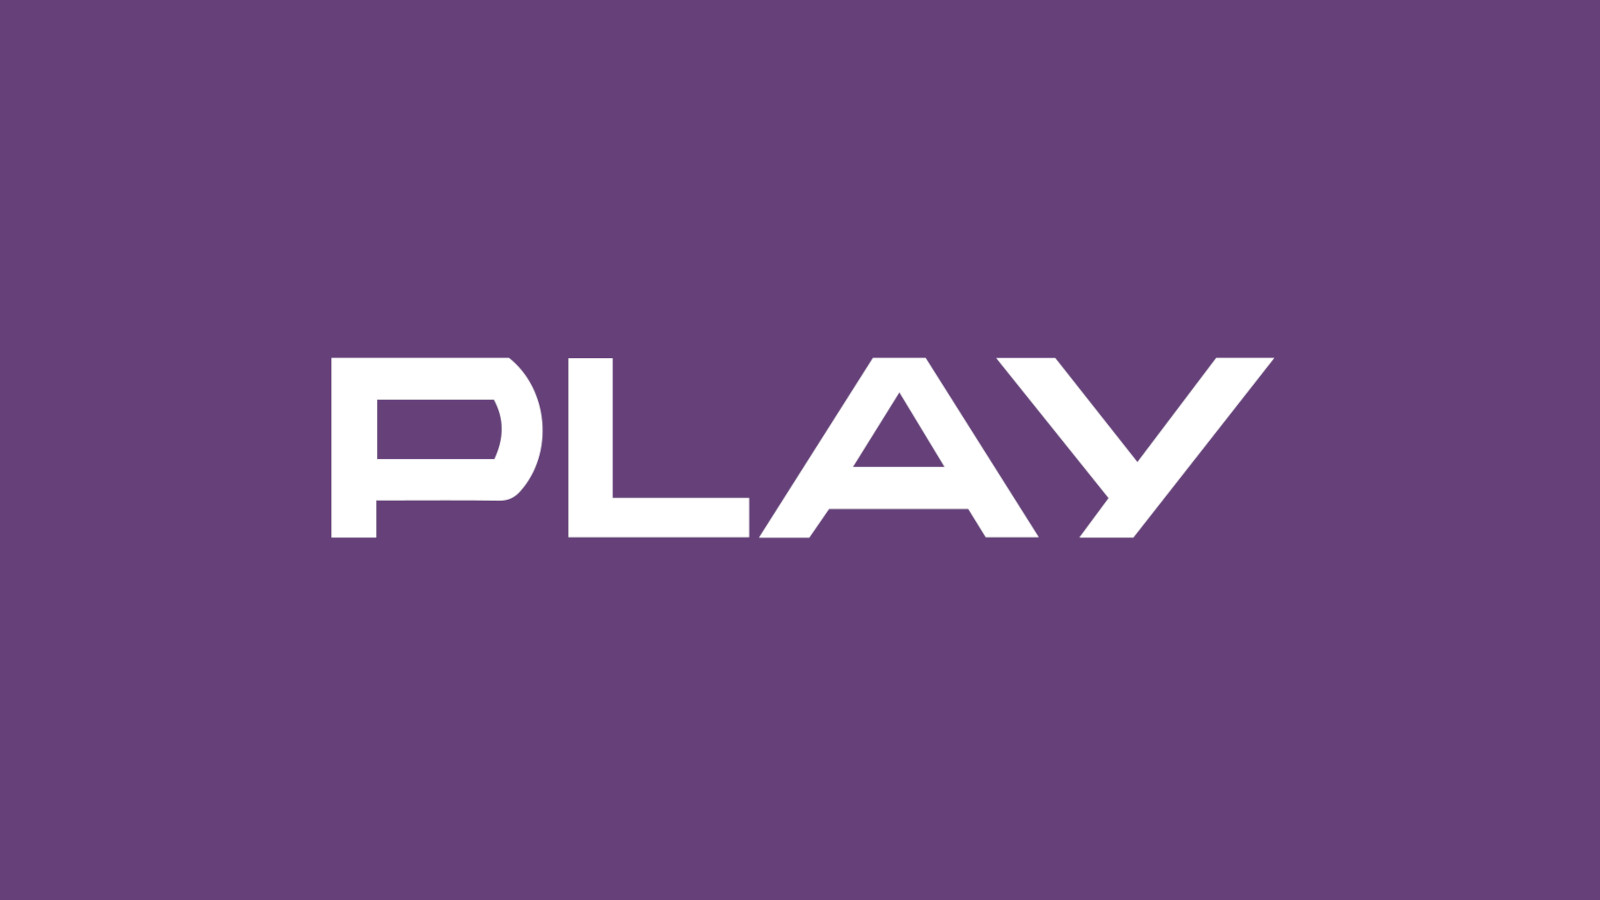 [$ 7.93] PLAY 30 PLN Mobile Top-up PL